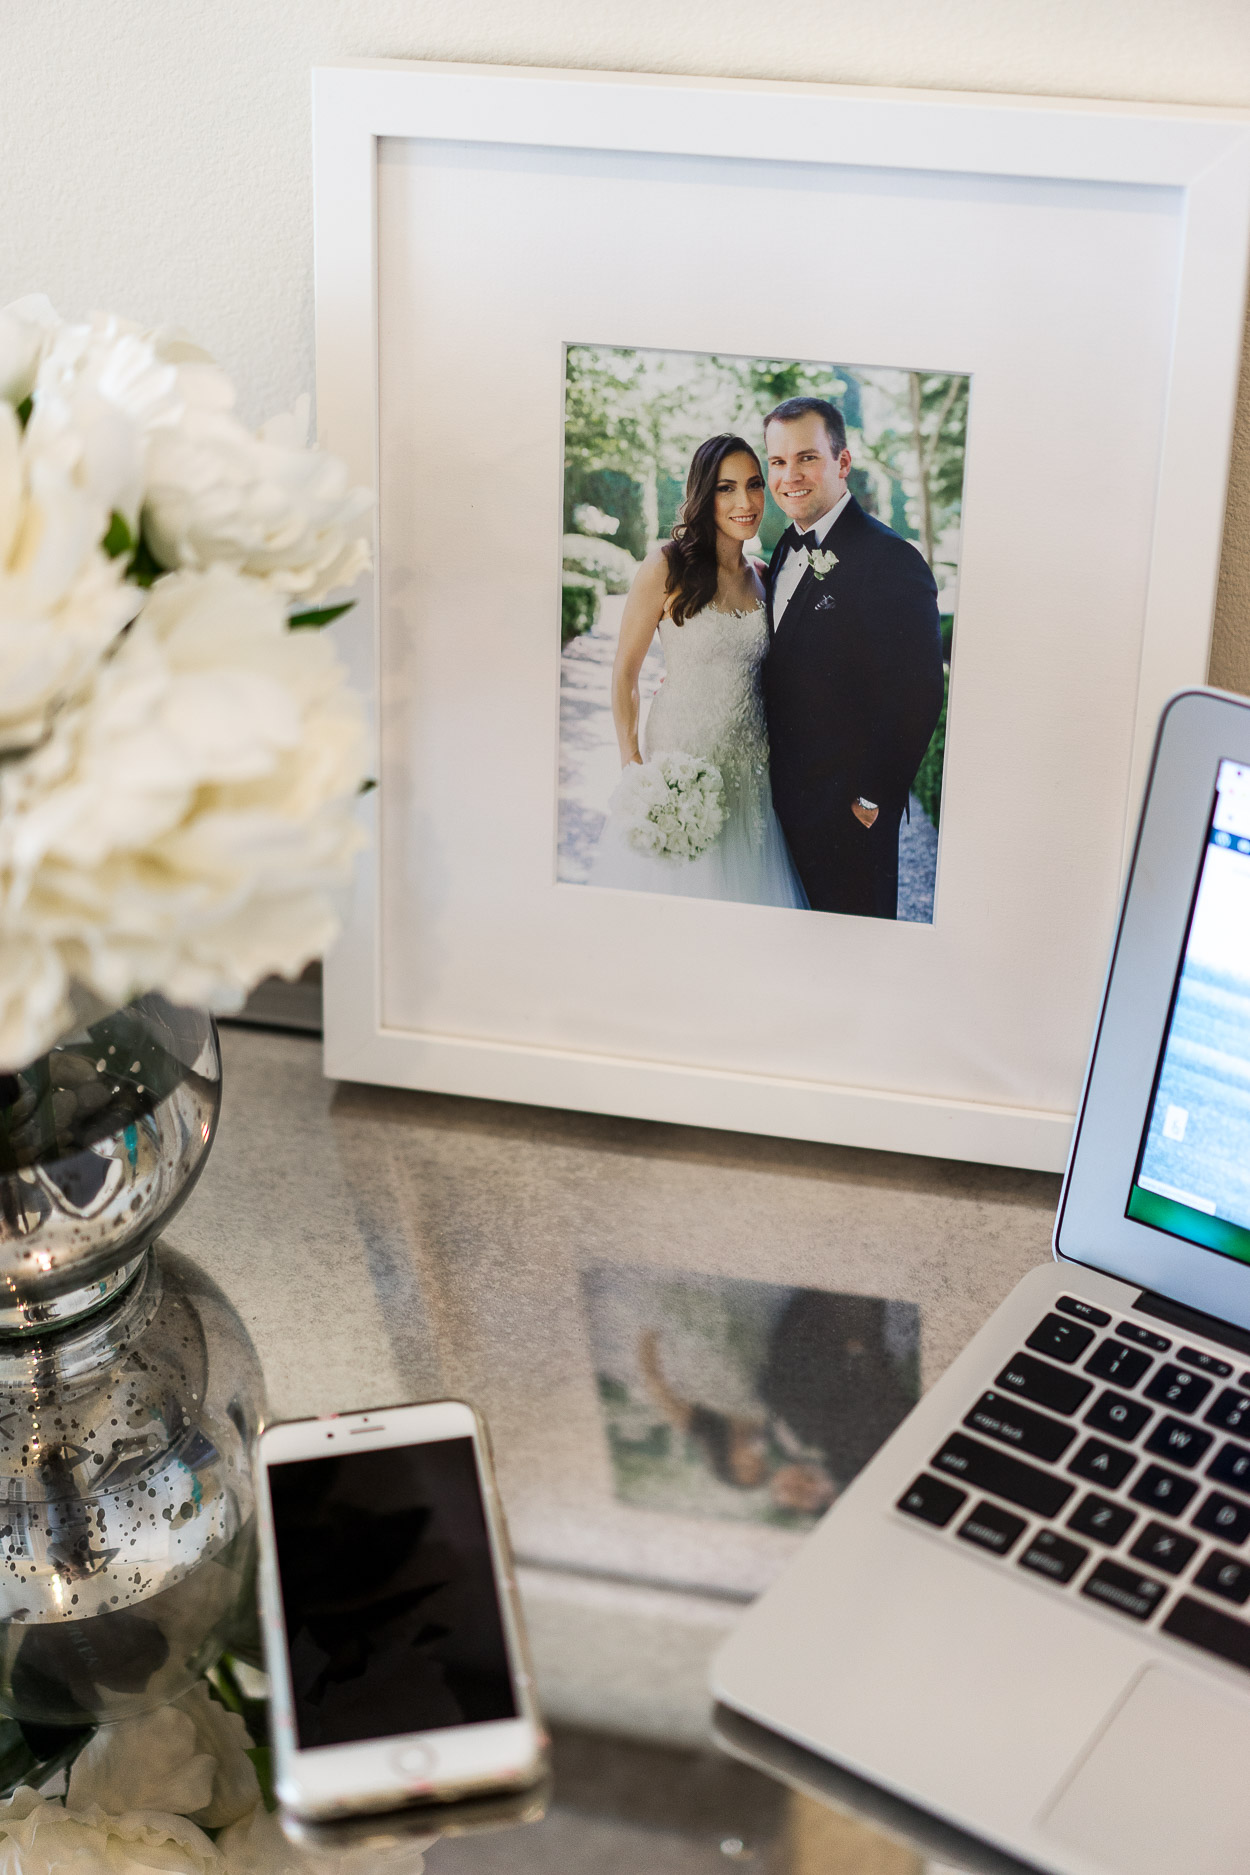 A Glam Lifestyle blogger styles the new Framebridge wedding collection at her home